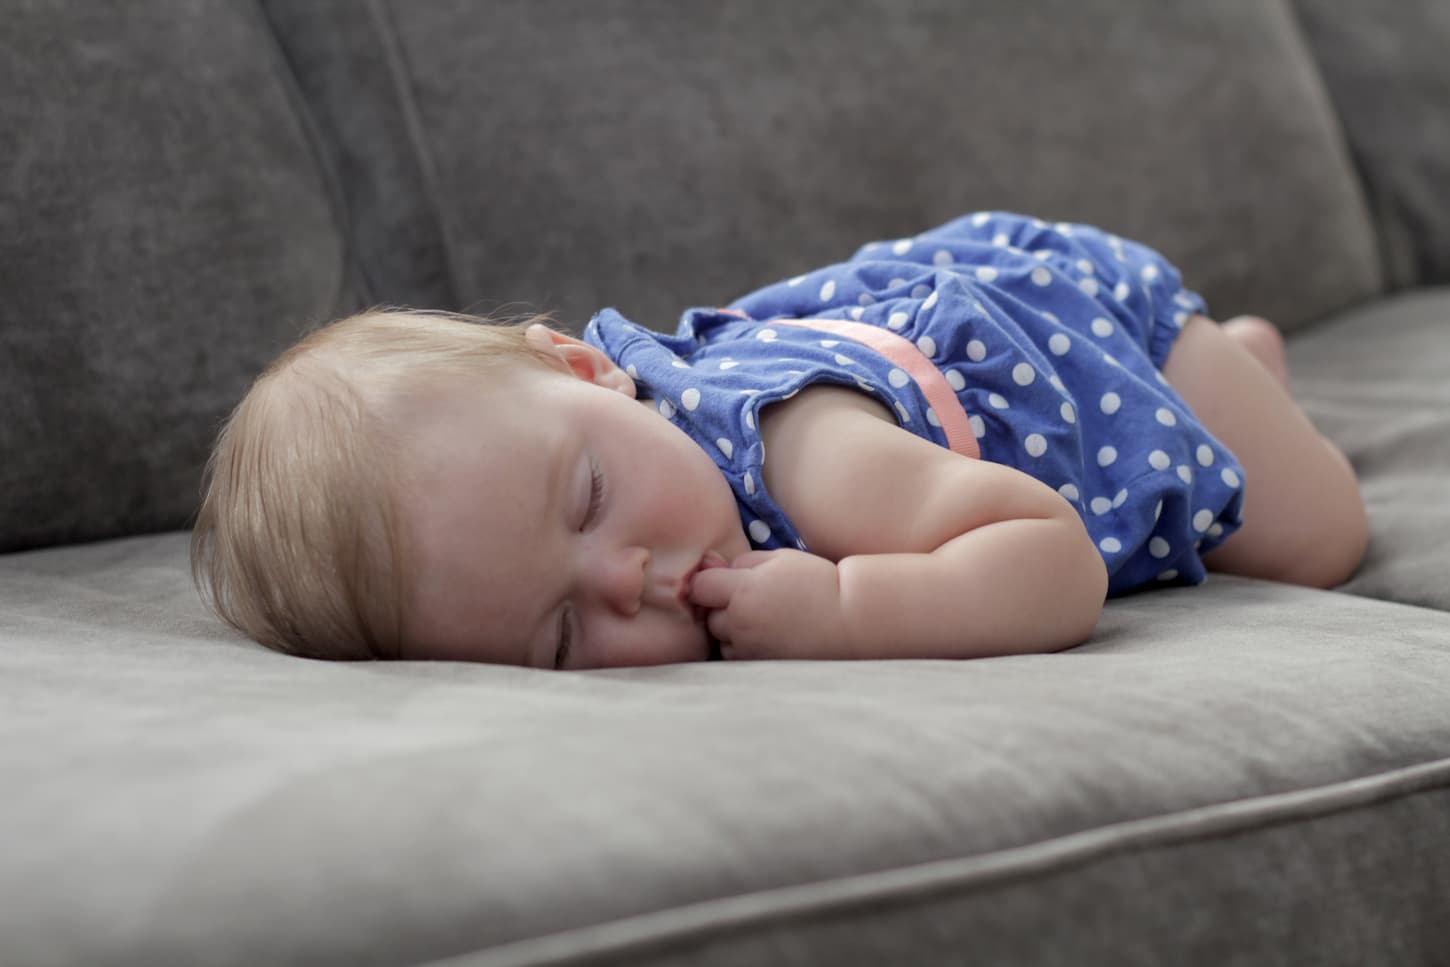 An image of a baby girl sleeping on the couch.